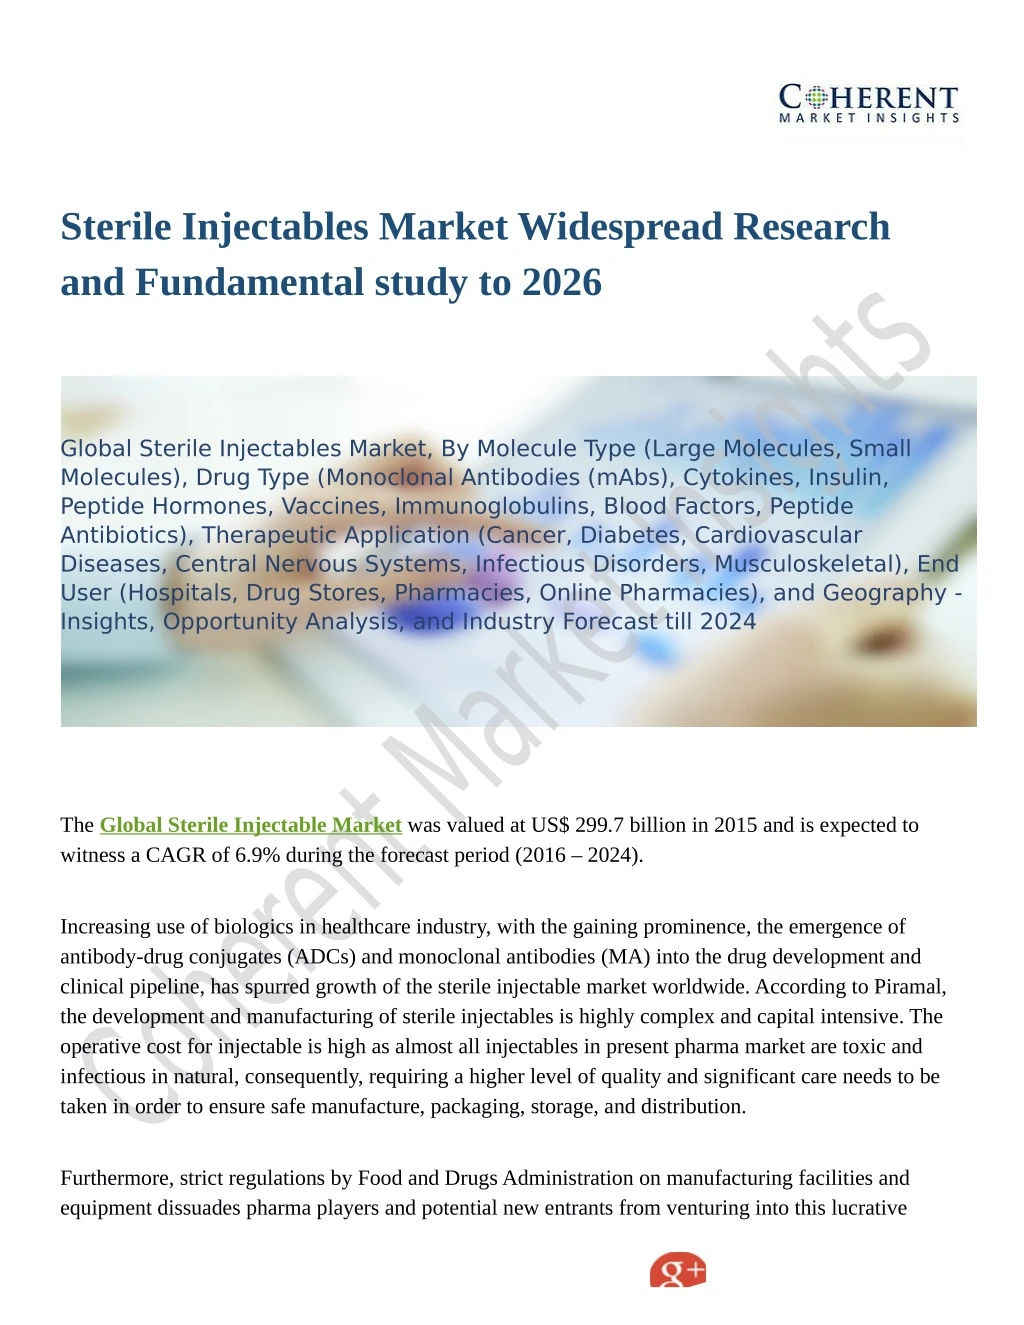 sterile injectables market widespread research